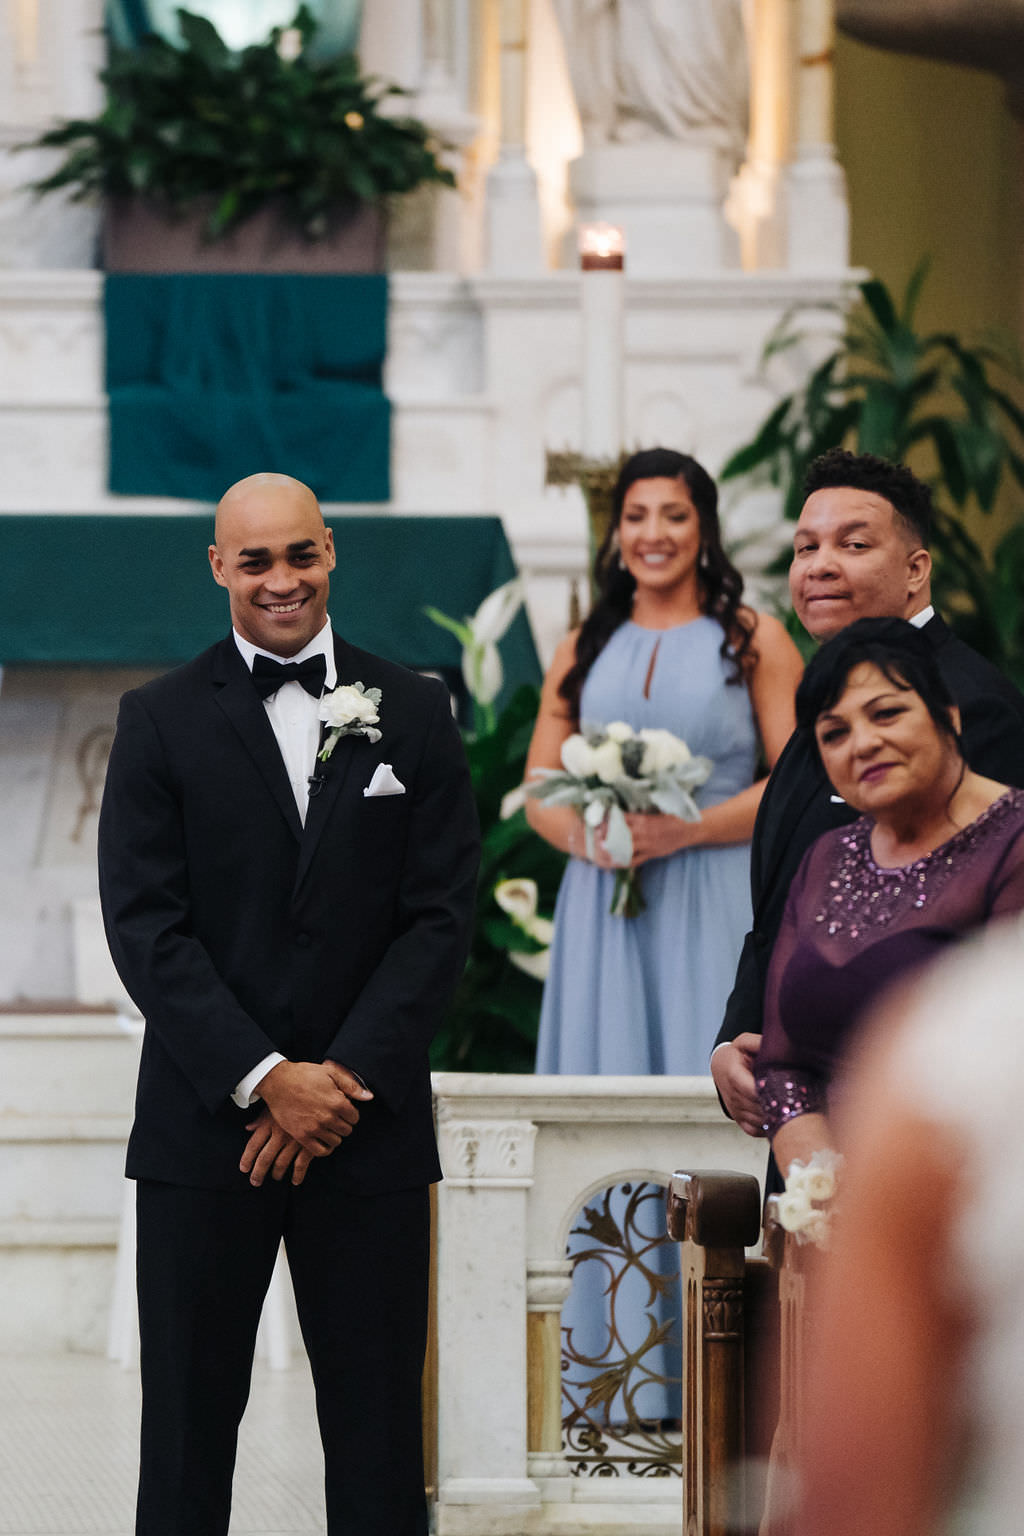 Groom in Classic Black Tuxedo and Bowtie During Wedding Processional at Sacred Heart Catholic Church Tampa | Photographer Grind & Press Photography